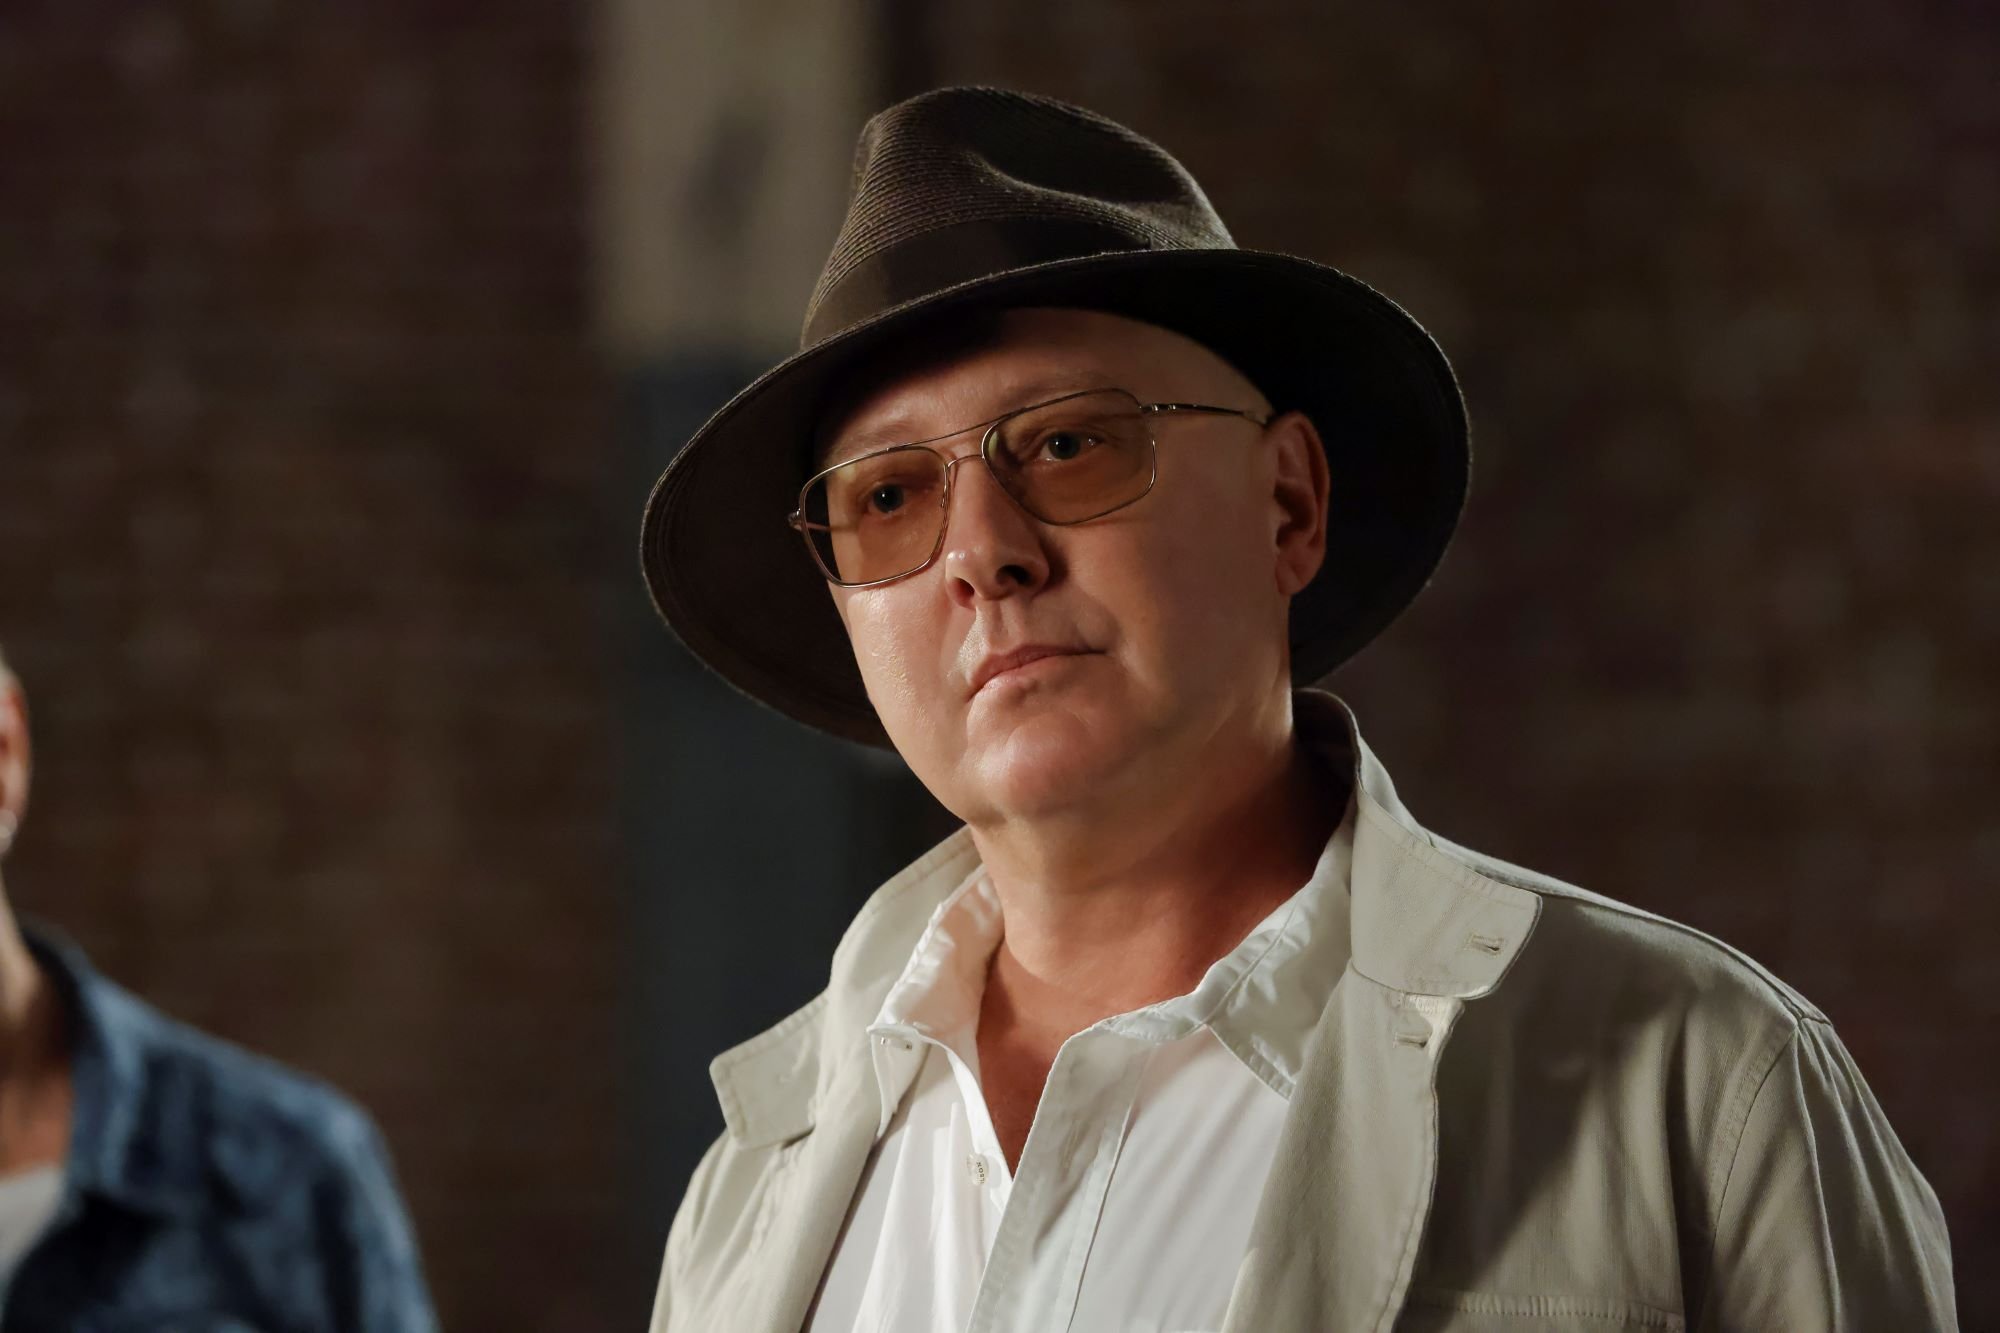 'The Blacklist' star James Spader, in character as Red, wears a brown fedora hat, tinted glasses, and a white jacket over a white button-up shirt.